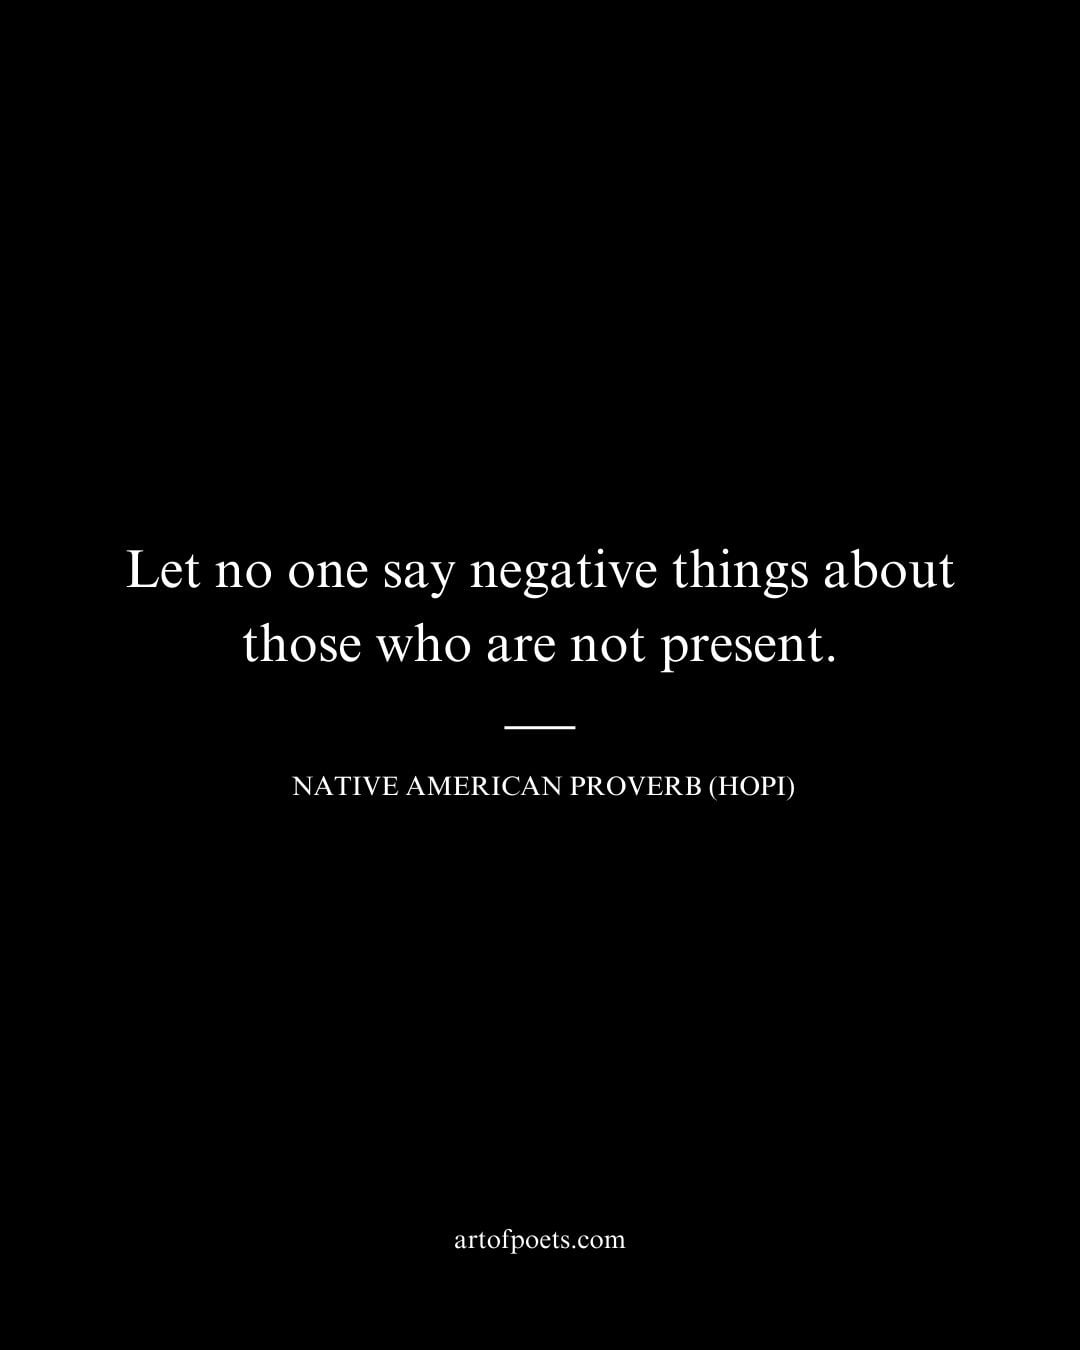 Let no one say negative things about those who are not present